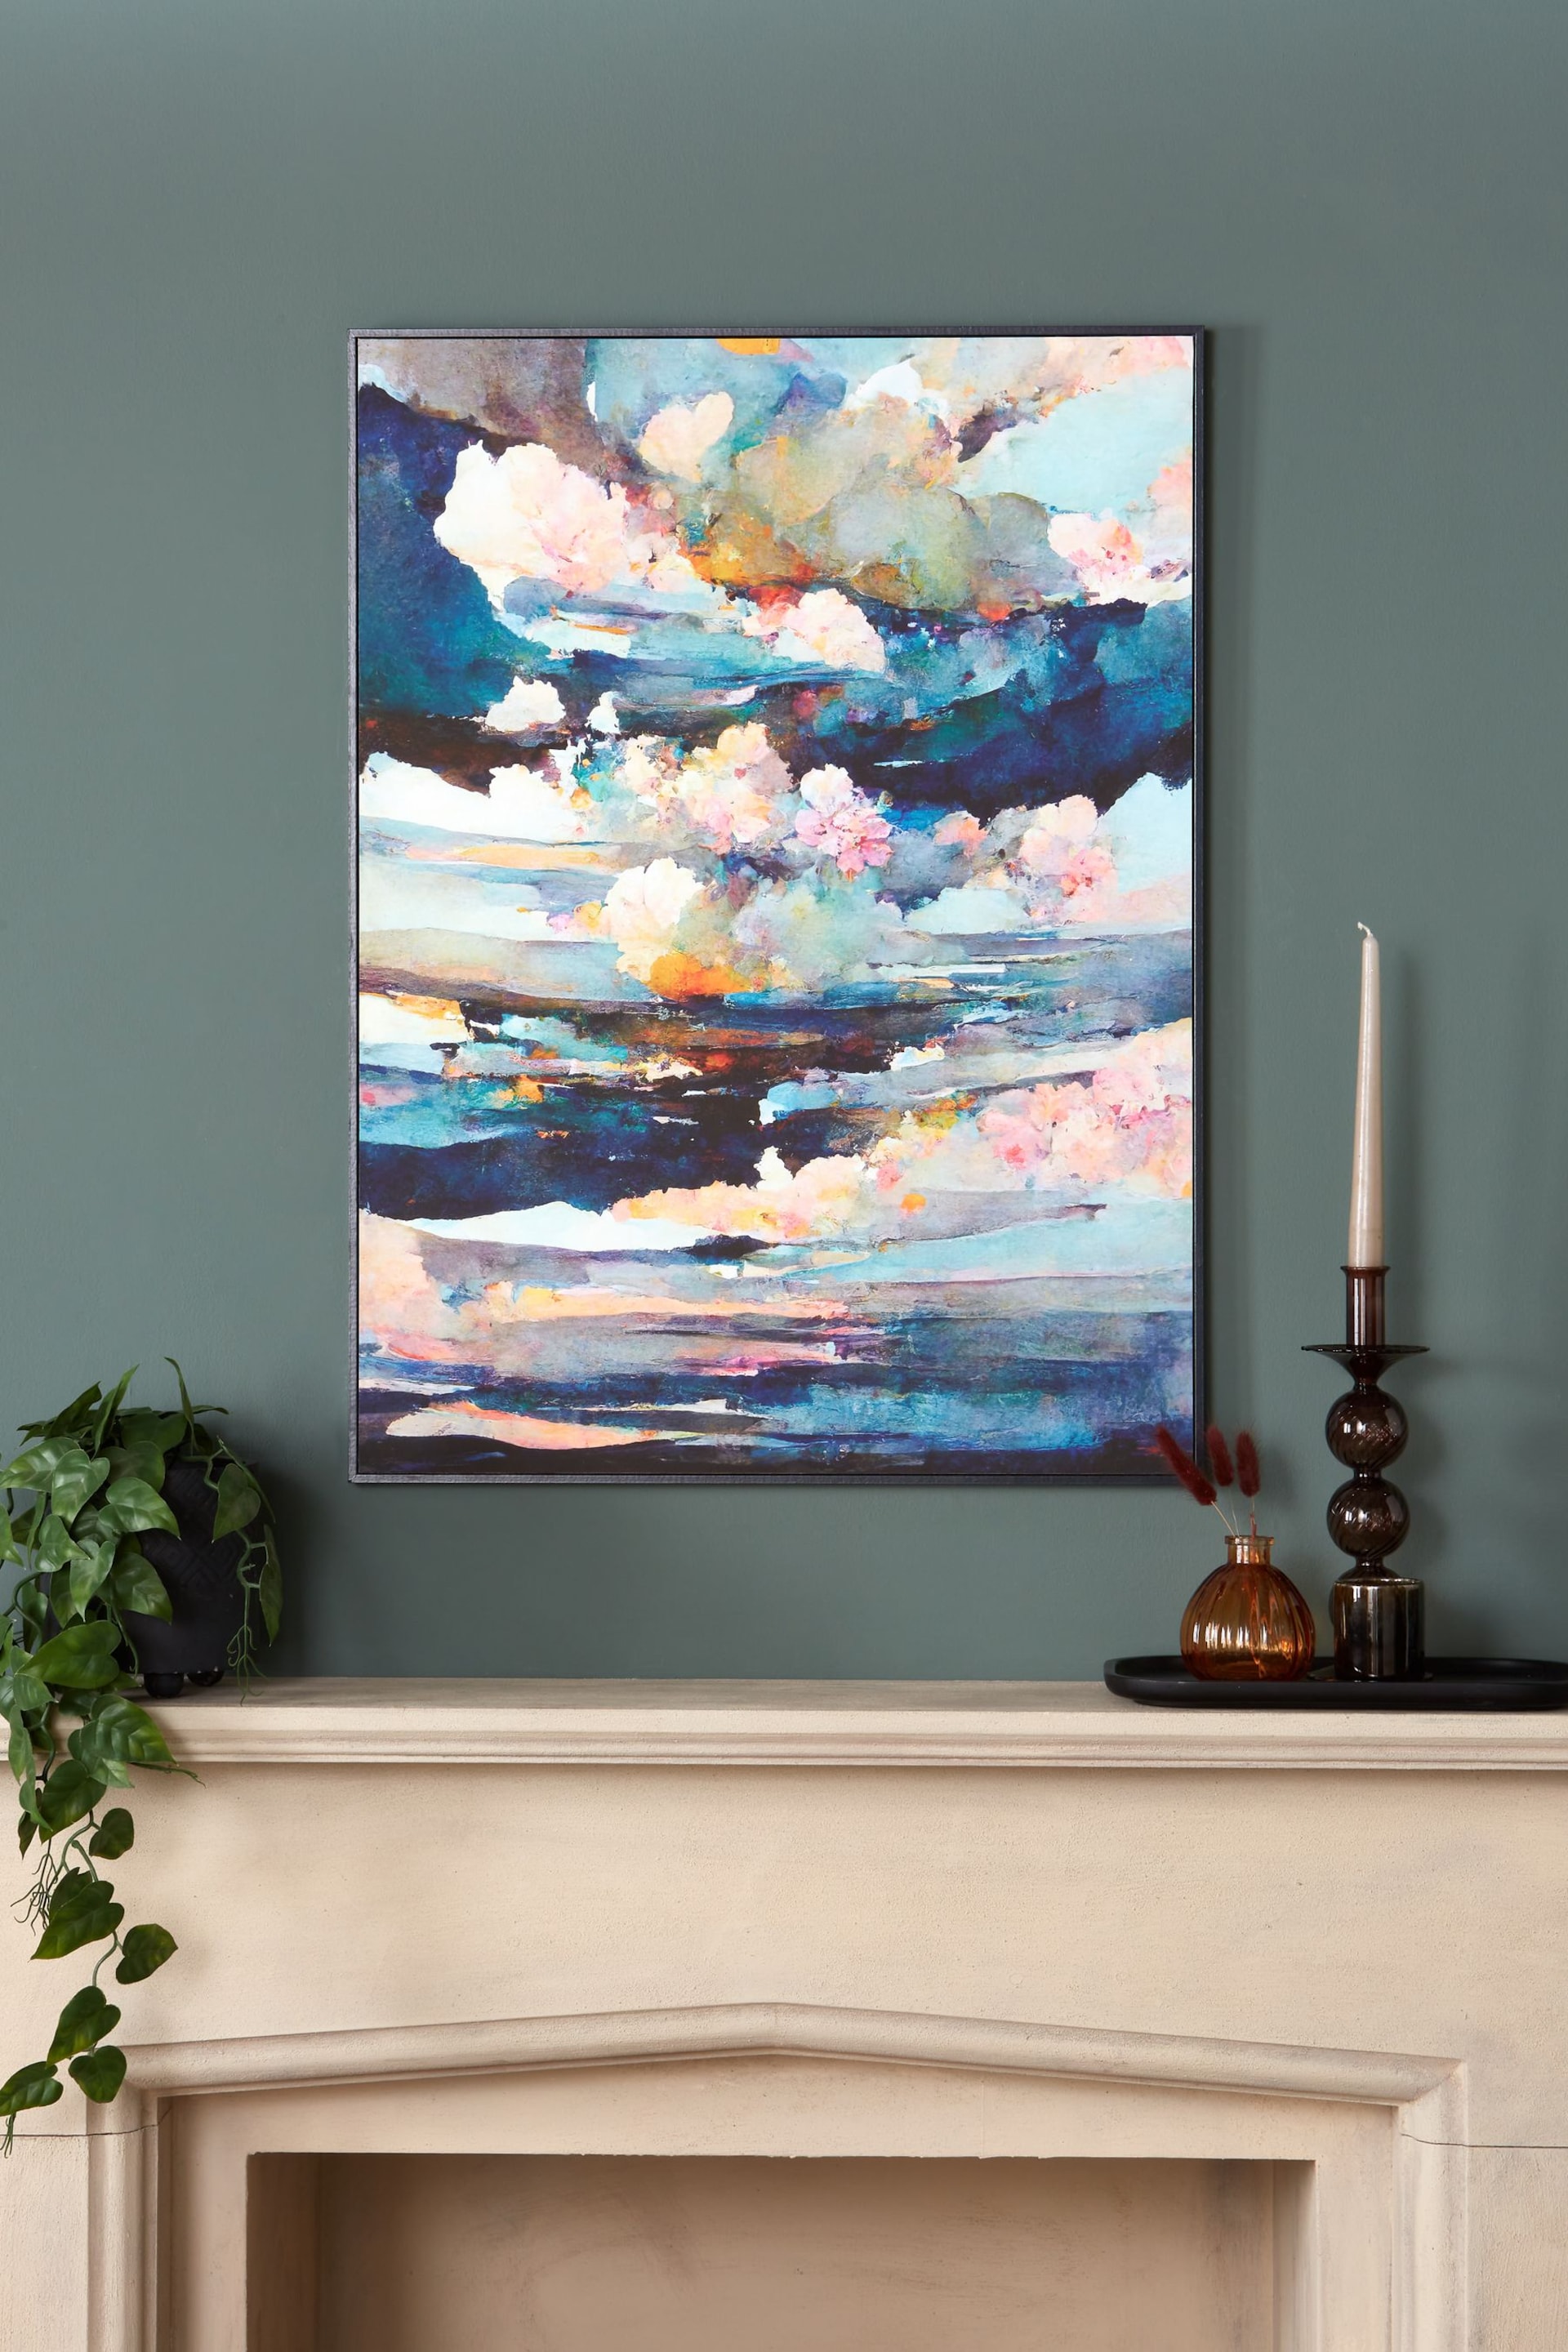 Blue Sky Abstract Framed Canvas Wall Art - Image 1 of 5